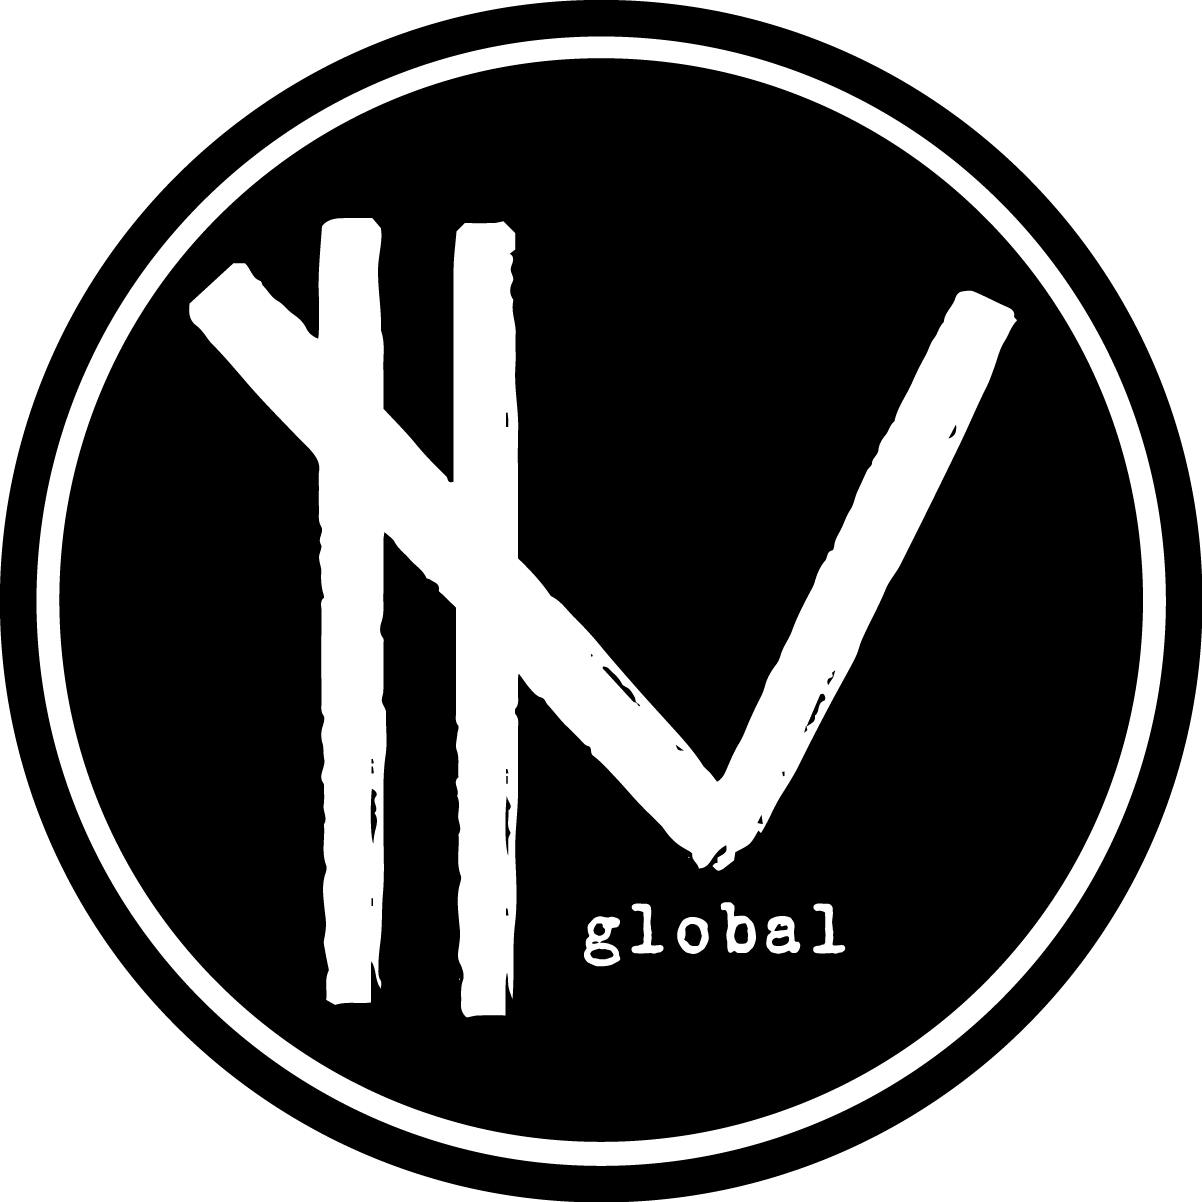 His Voice Global